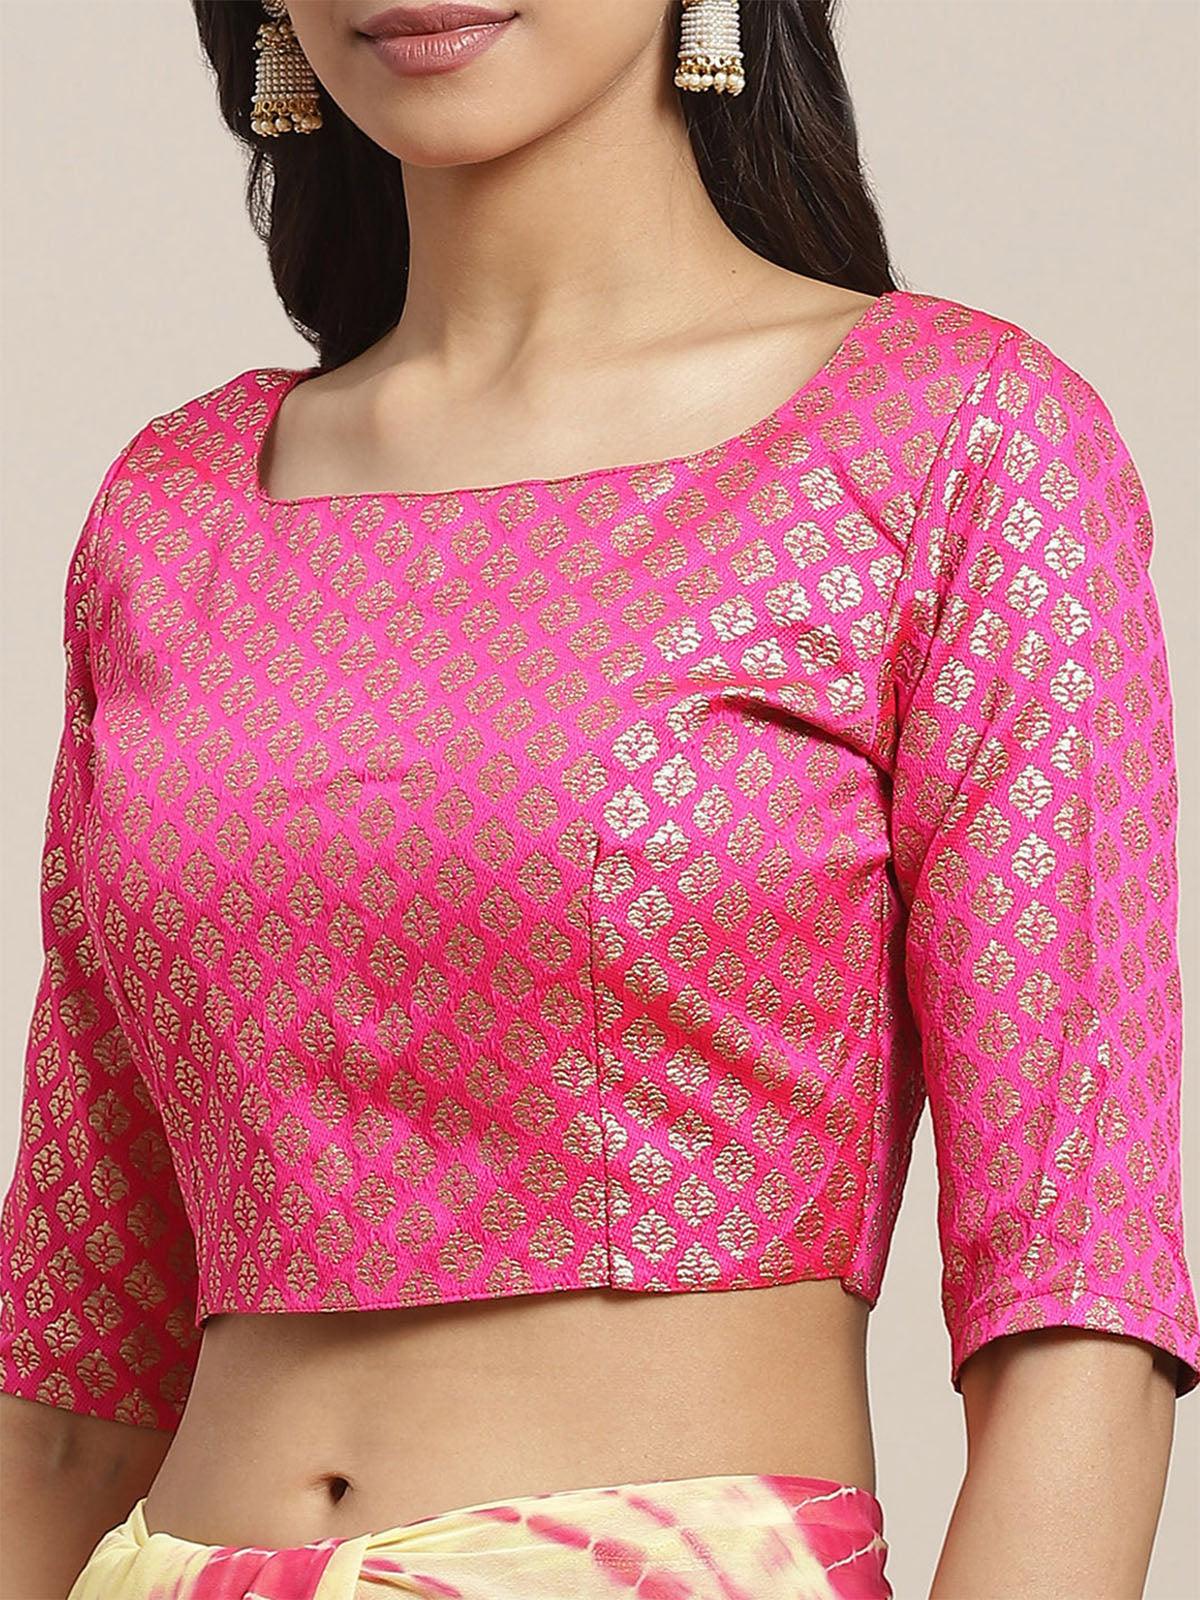 Pink Festive Georgette Woven Saree With Unstitched Blouse - Odette